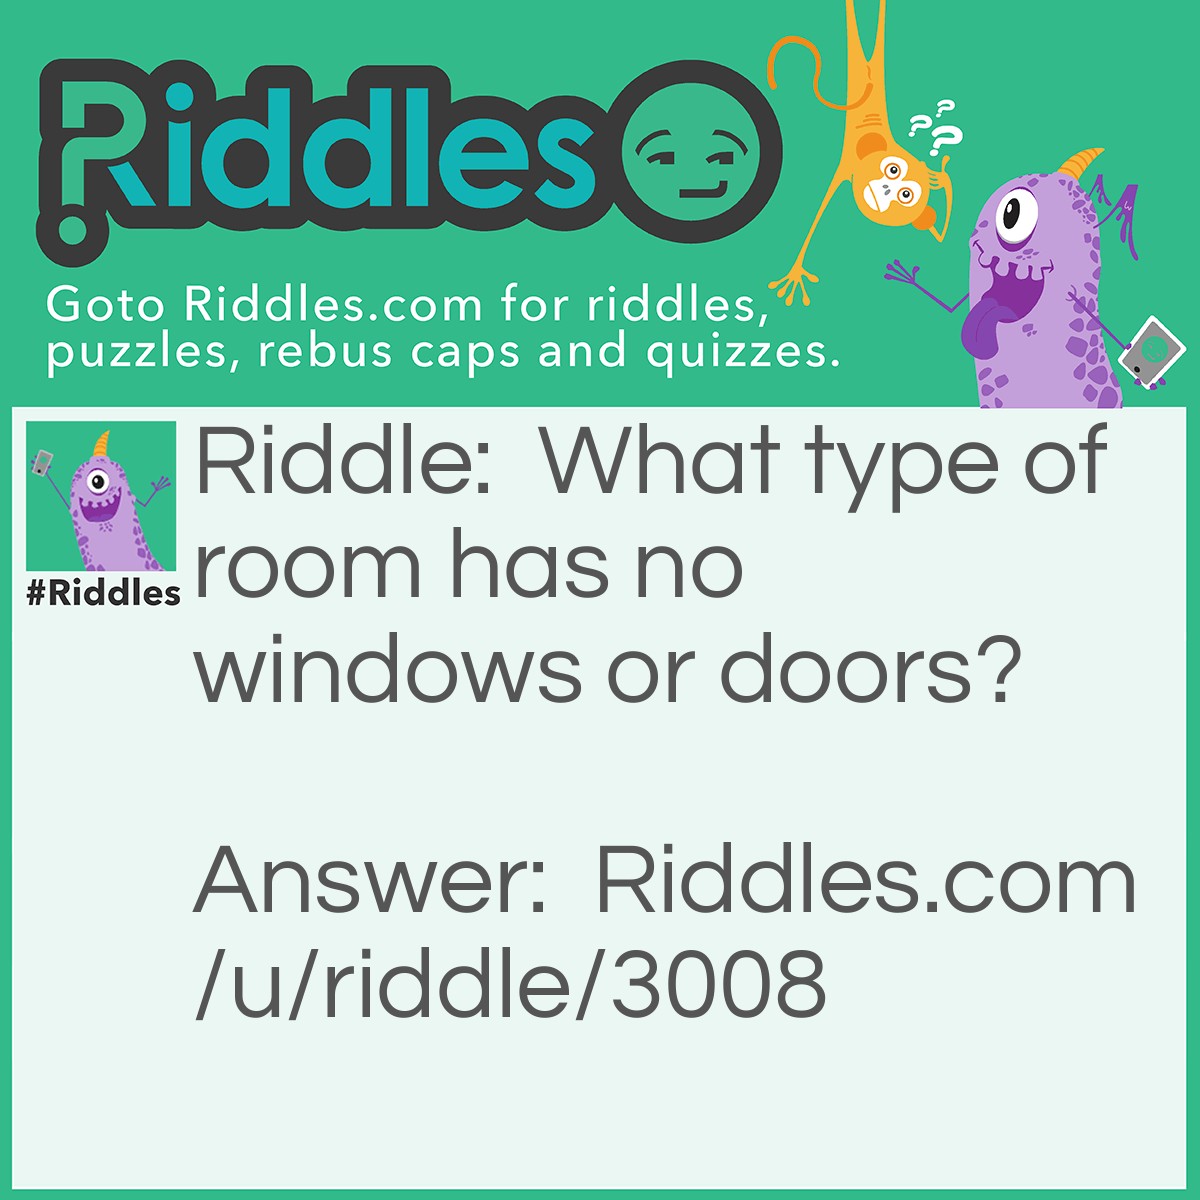 Riddle: What type of room has no windows or doors? Answer: A Mushroom ;)